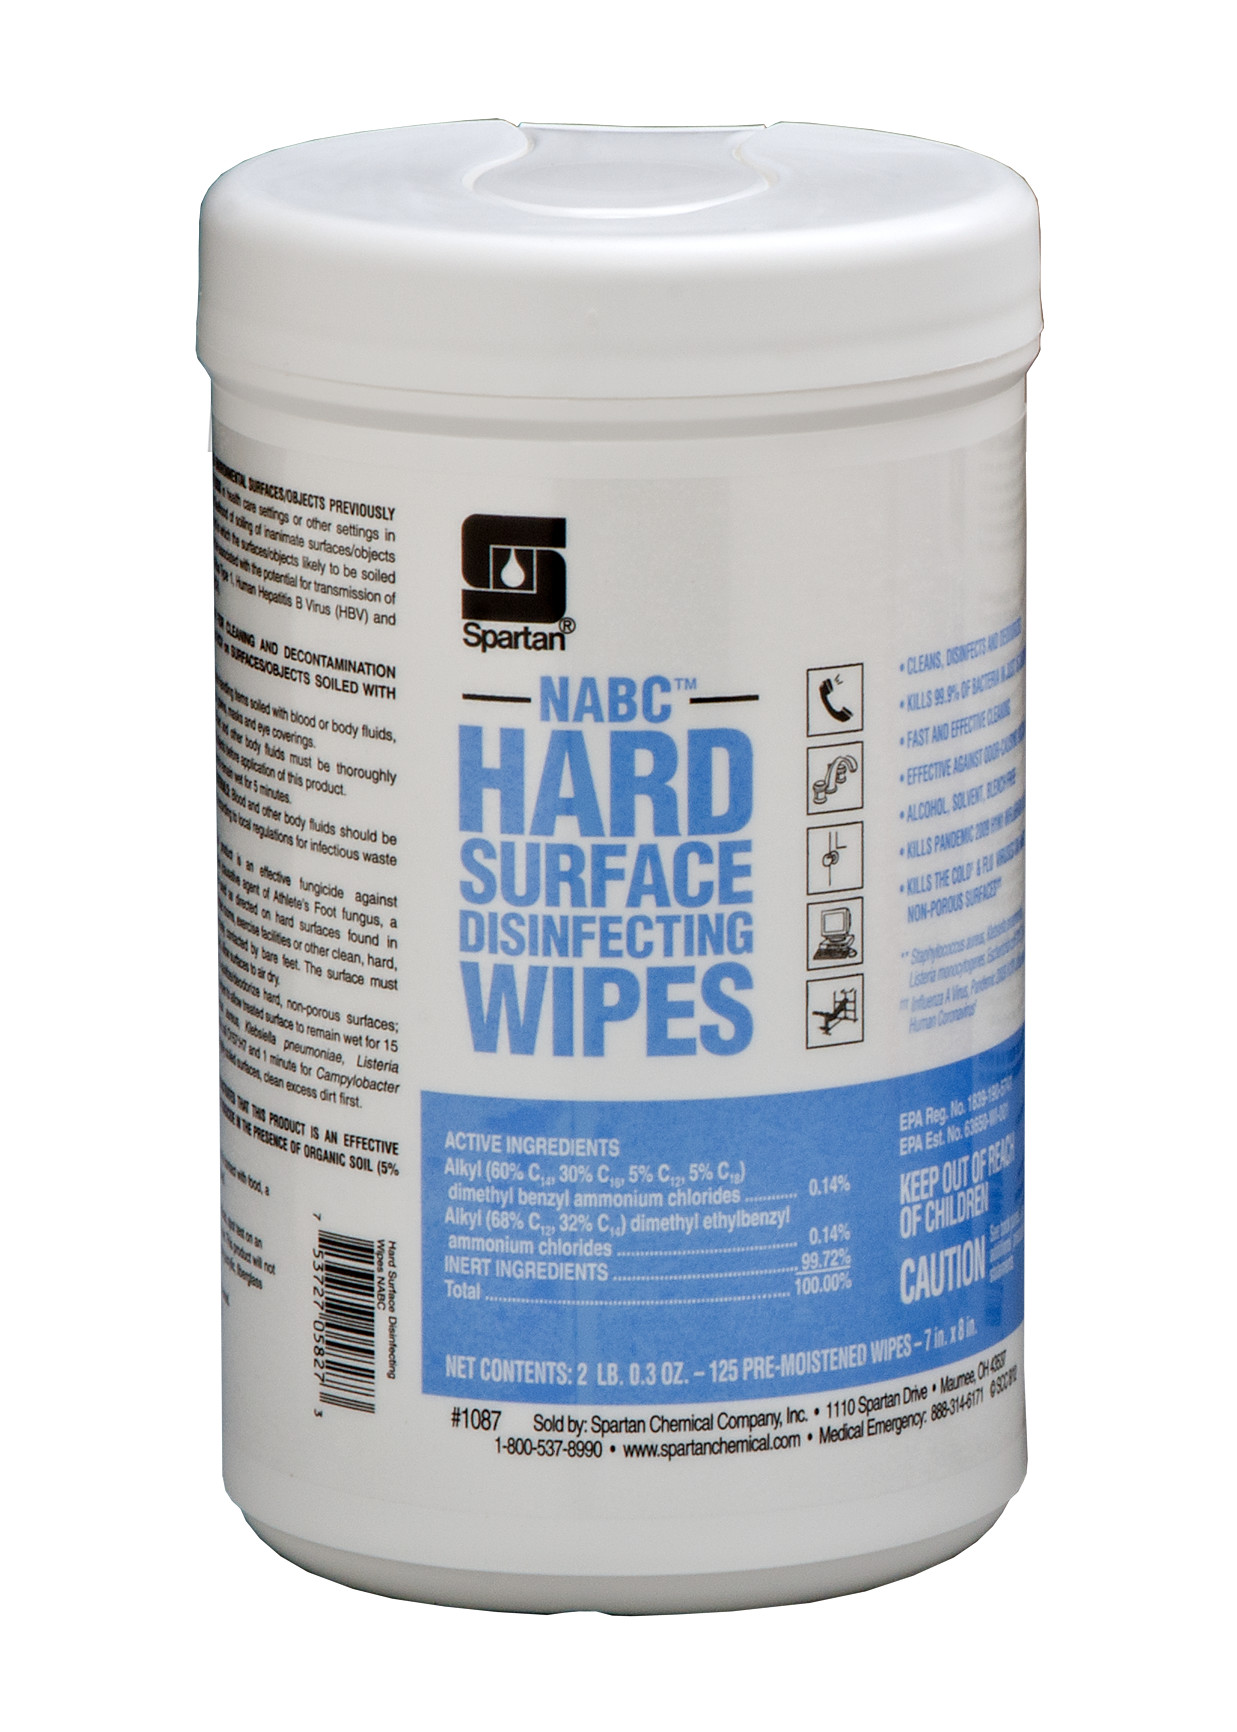 NABC+Hard+Surface+Disinfecting+Wipes+%7B125+wipes+%286+per+case%29%7D